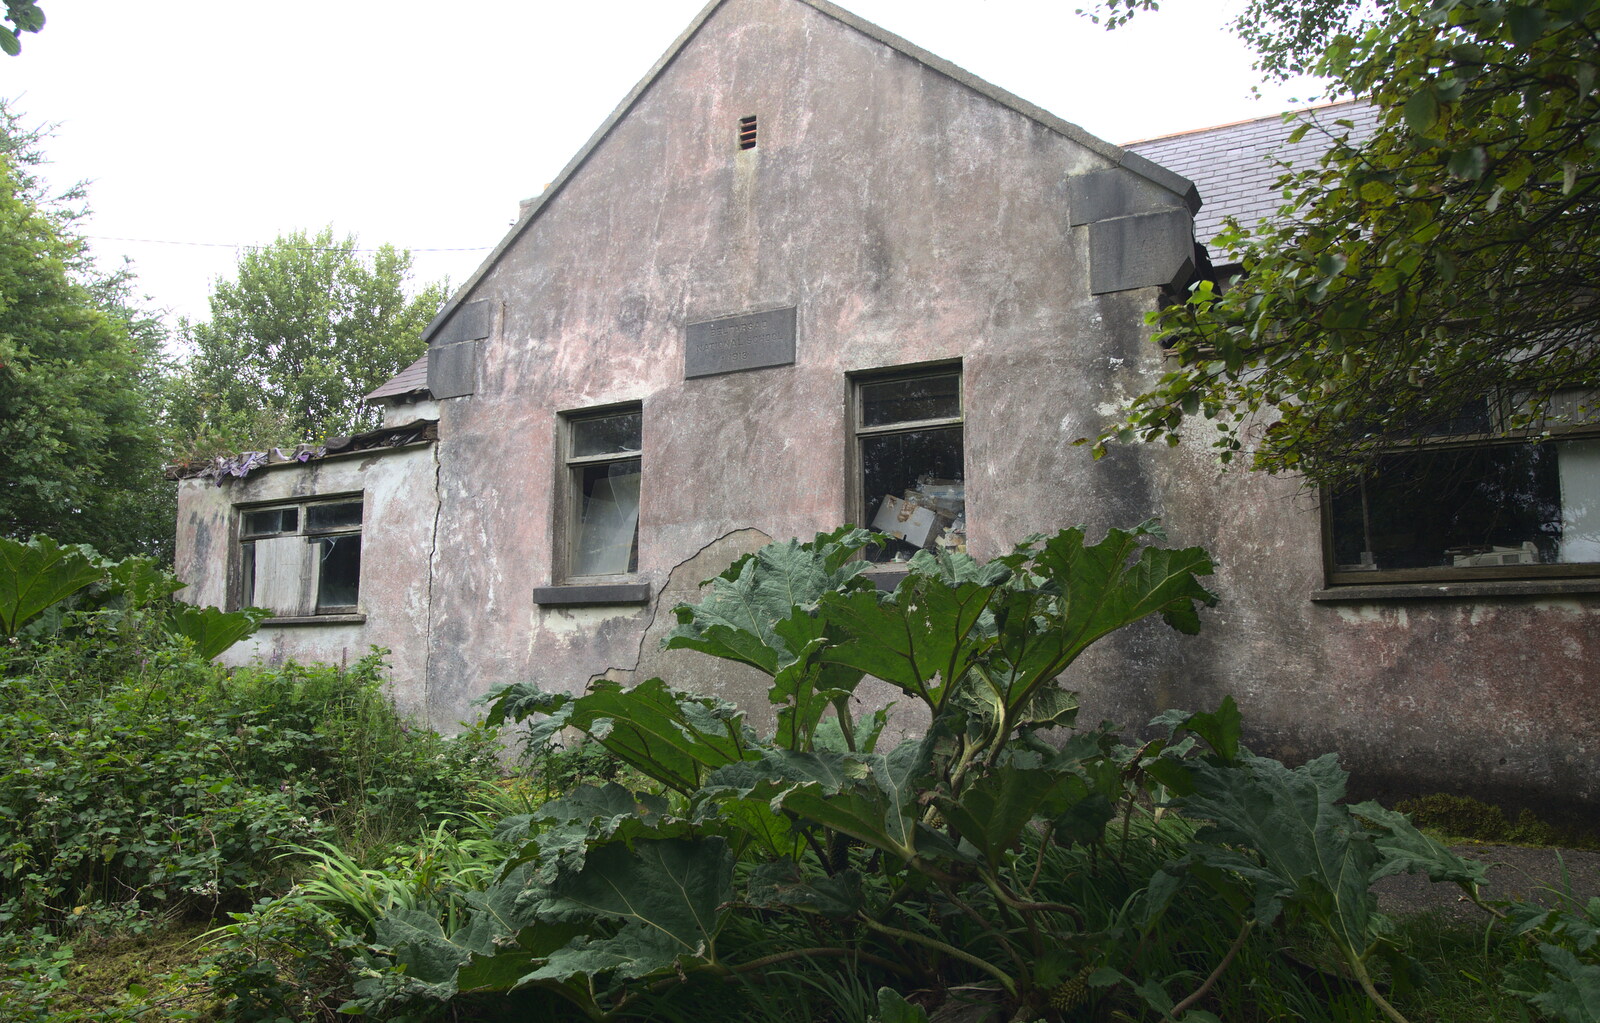 The derelict school from From Achill to Strokestown, Mayo and Roscommon, Ireland - 10th August 2017